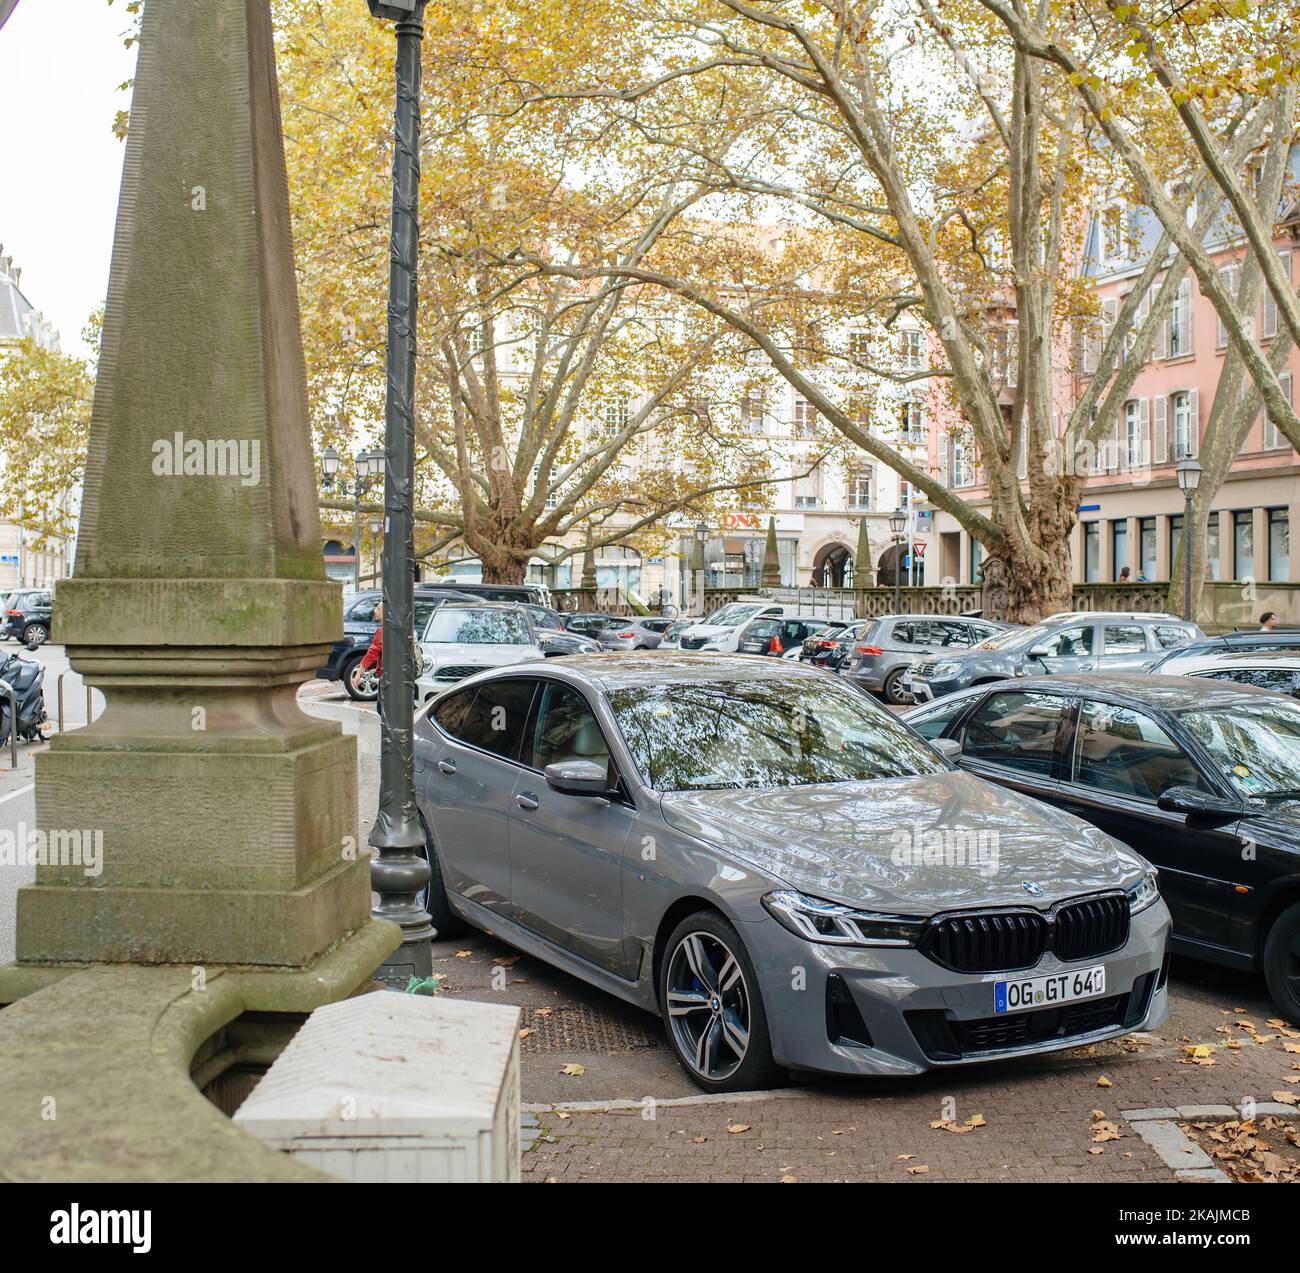 Strasbourg, France - Oct 28, 2022: New luxury gray BMW m sport car parked in city center - large area with multiple luxury cars Stock Photo